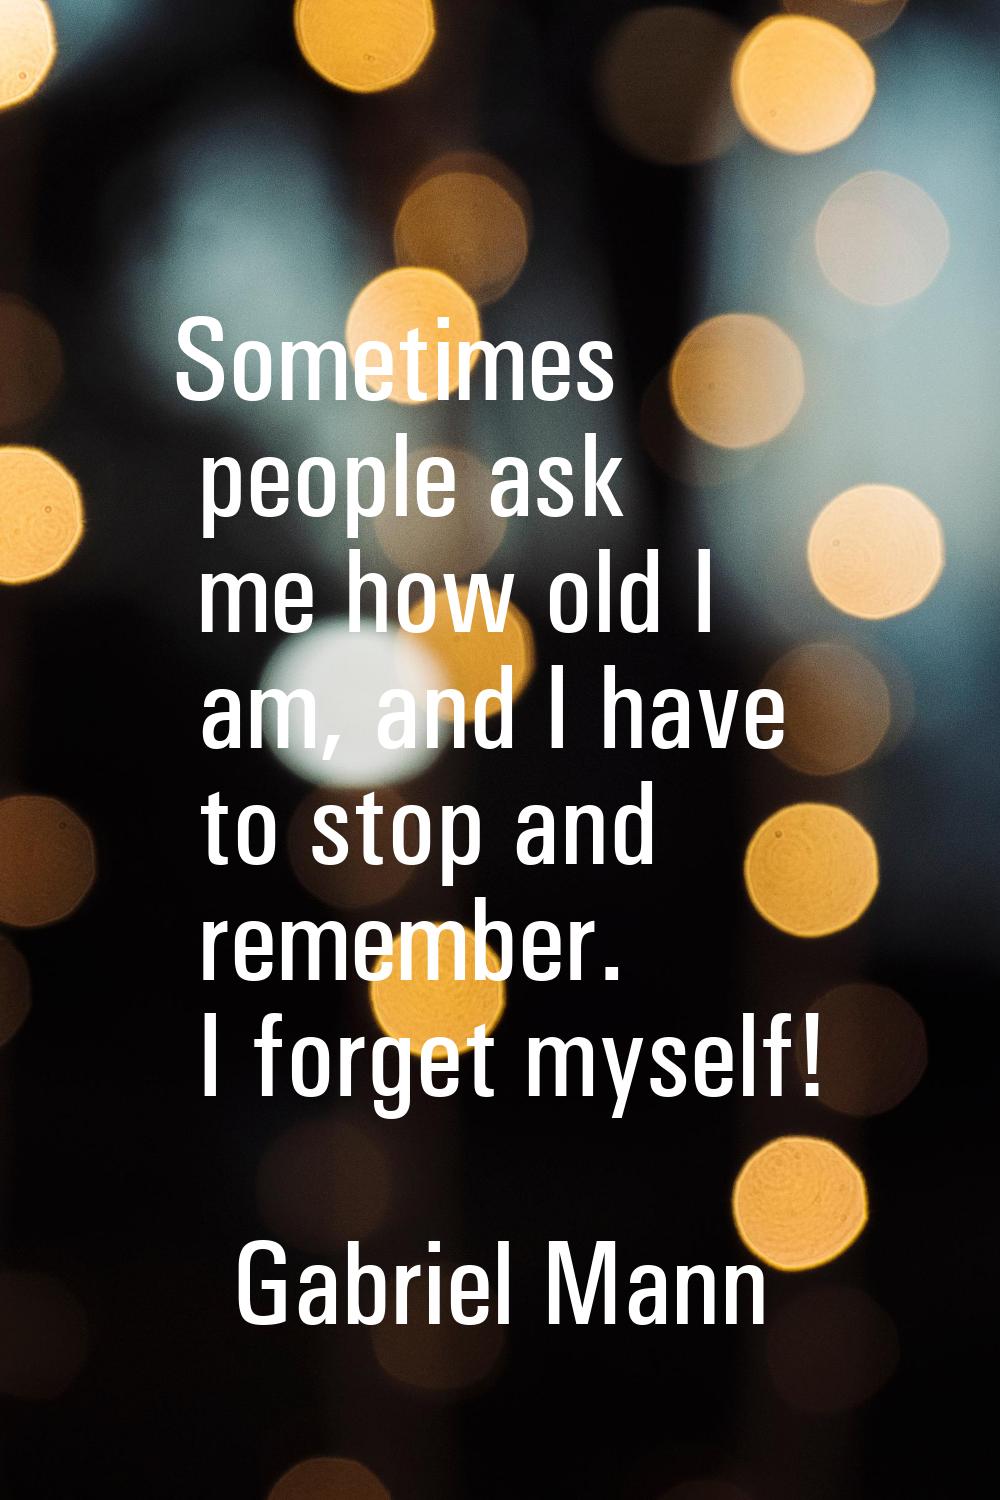 Sometimes people ask me how old I am, and I have to stop and remember. I forget myself!